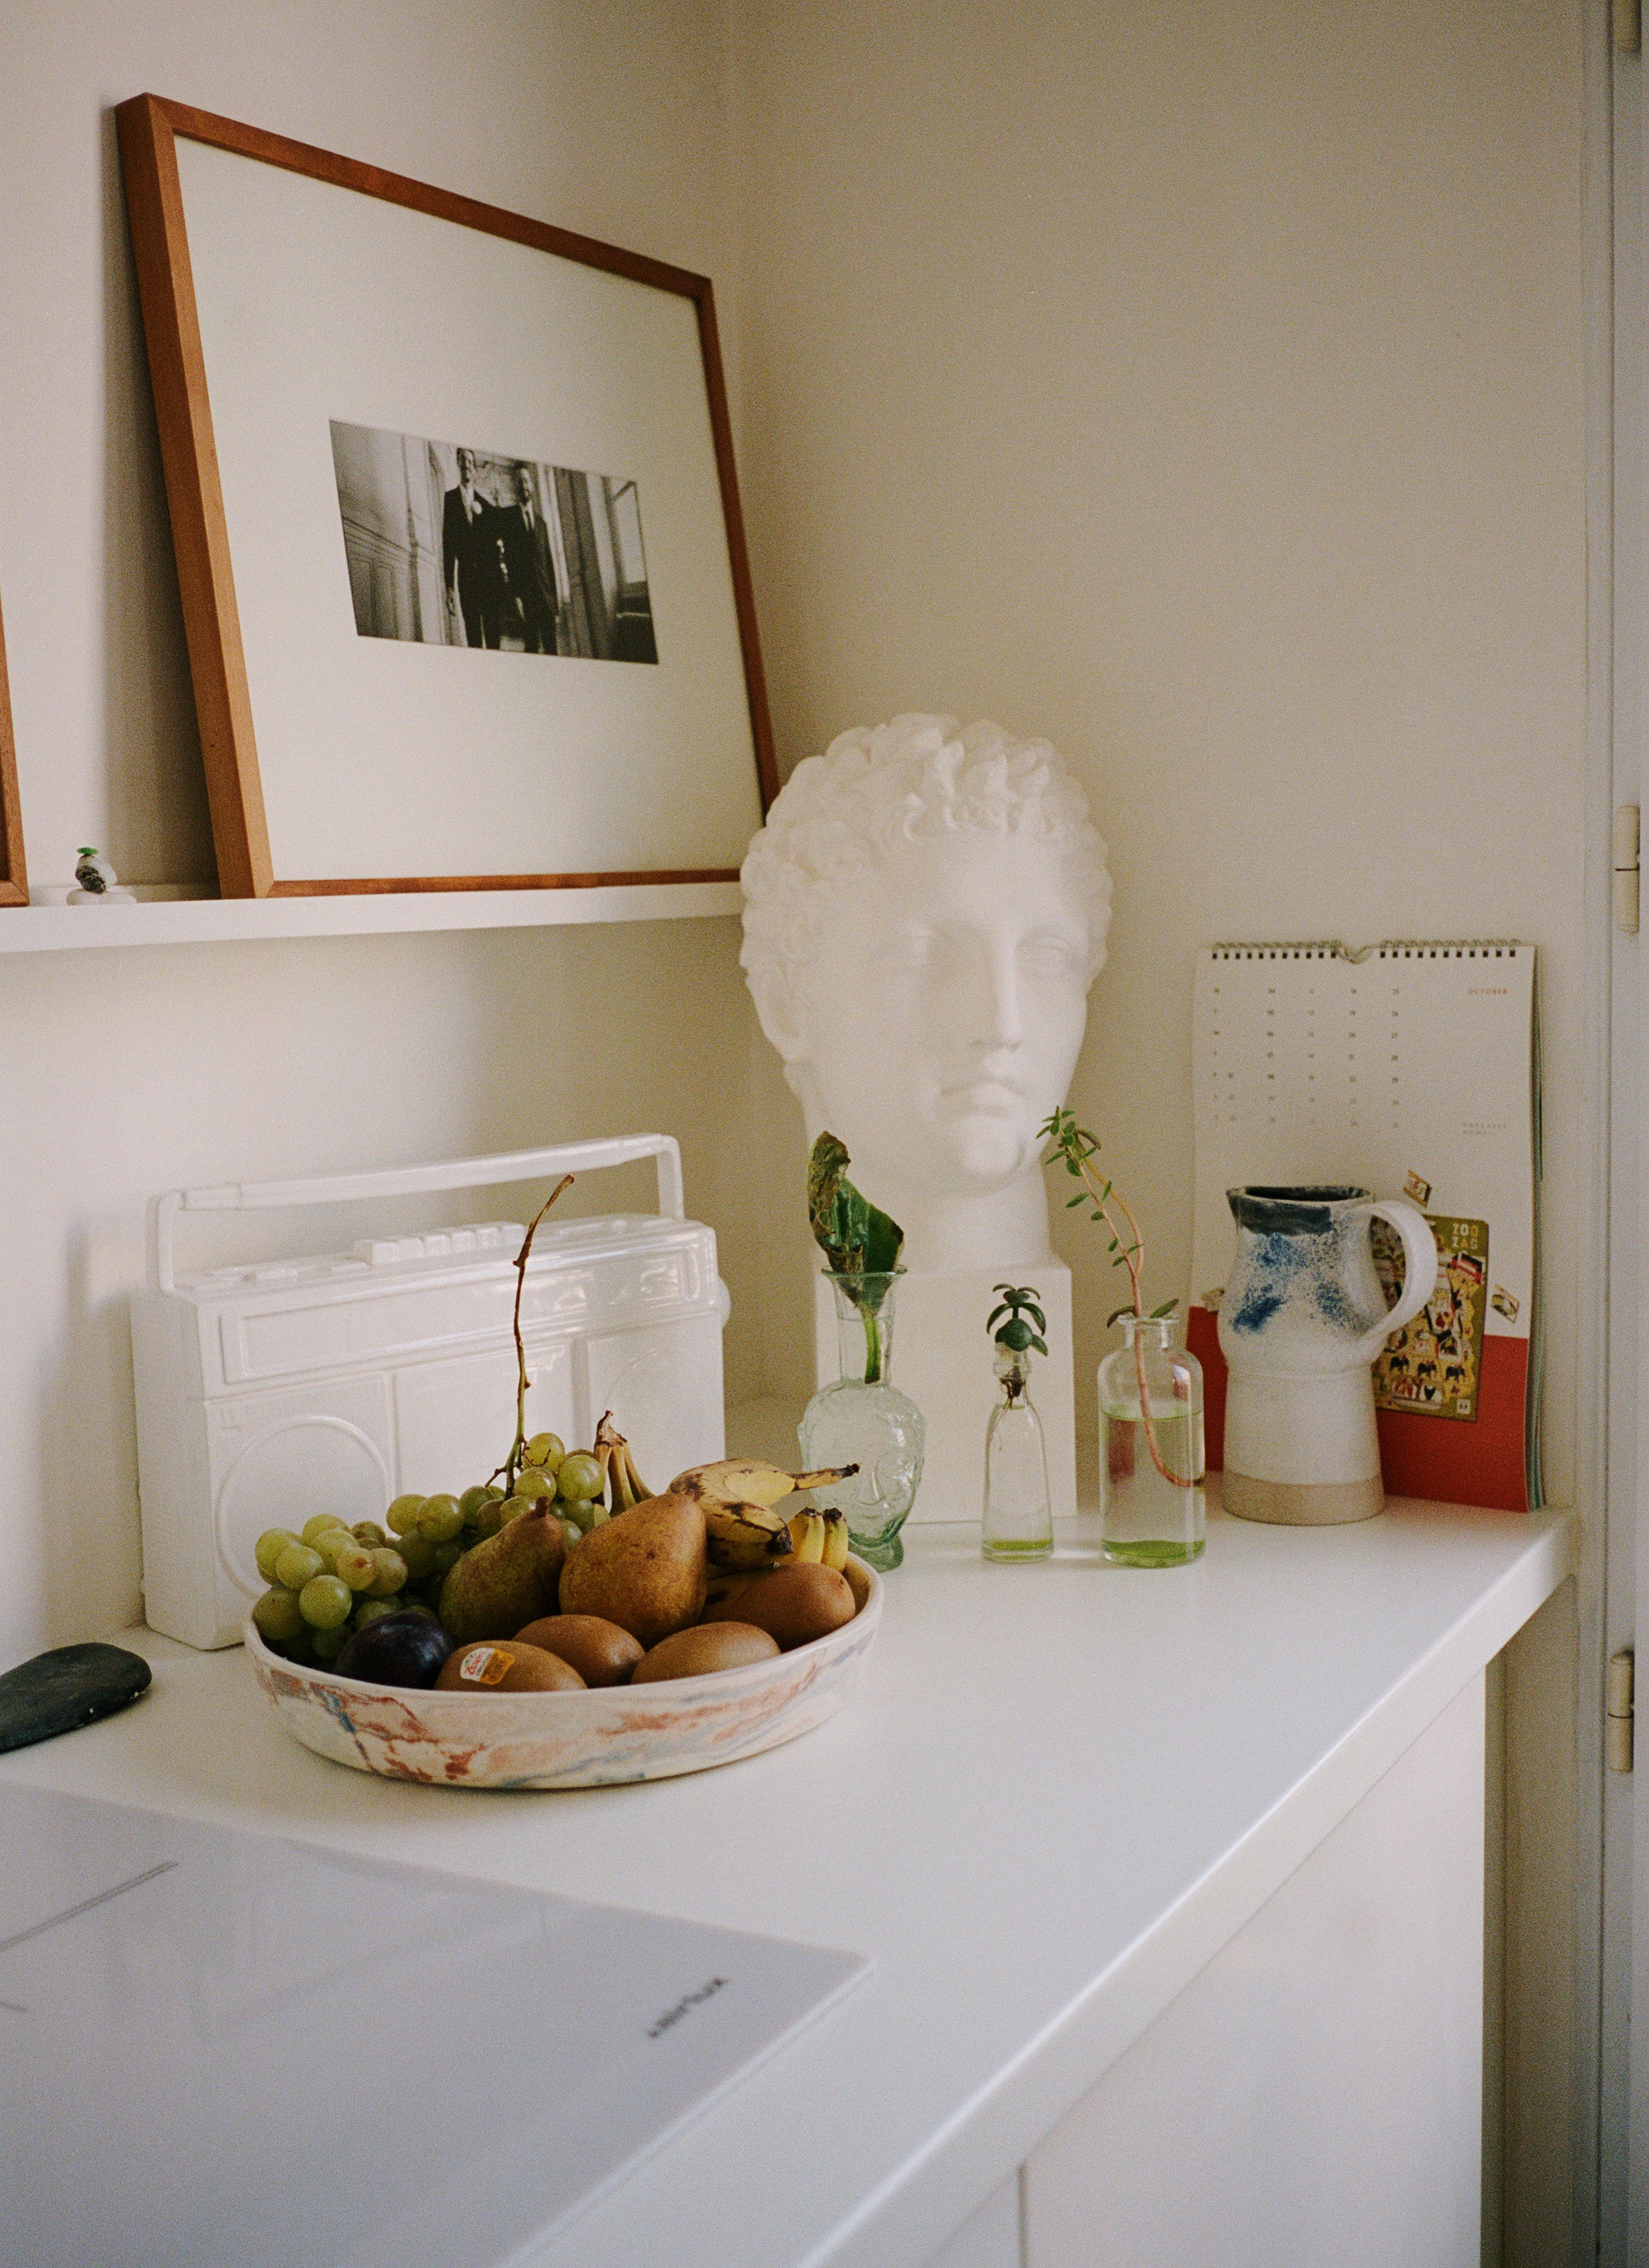 On the table, there is a bowl of fruits with bananas, grapes, plums, pears and kiwis, a white radio, a head statue, three plants growing in different shapes of glass vases, a ceramic-like jug and a calendar. Also a framed black and white picture on the wall shelf.